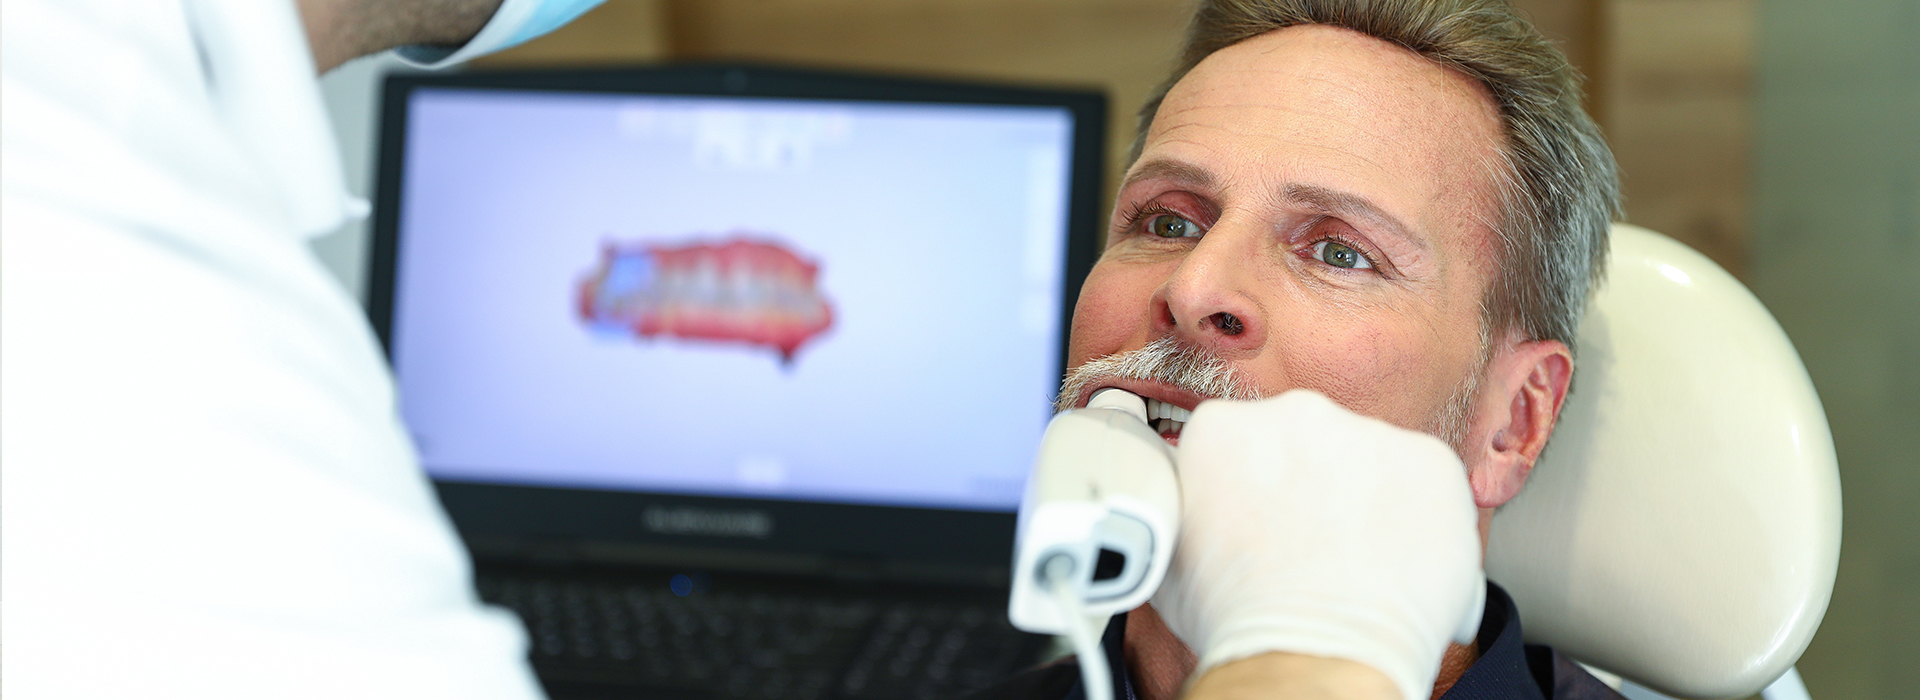 The image depicts a man receiving dental care, with a dental professional using a computer screen to guide the procedure.